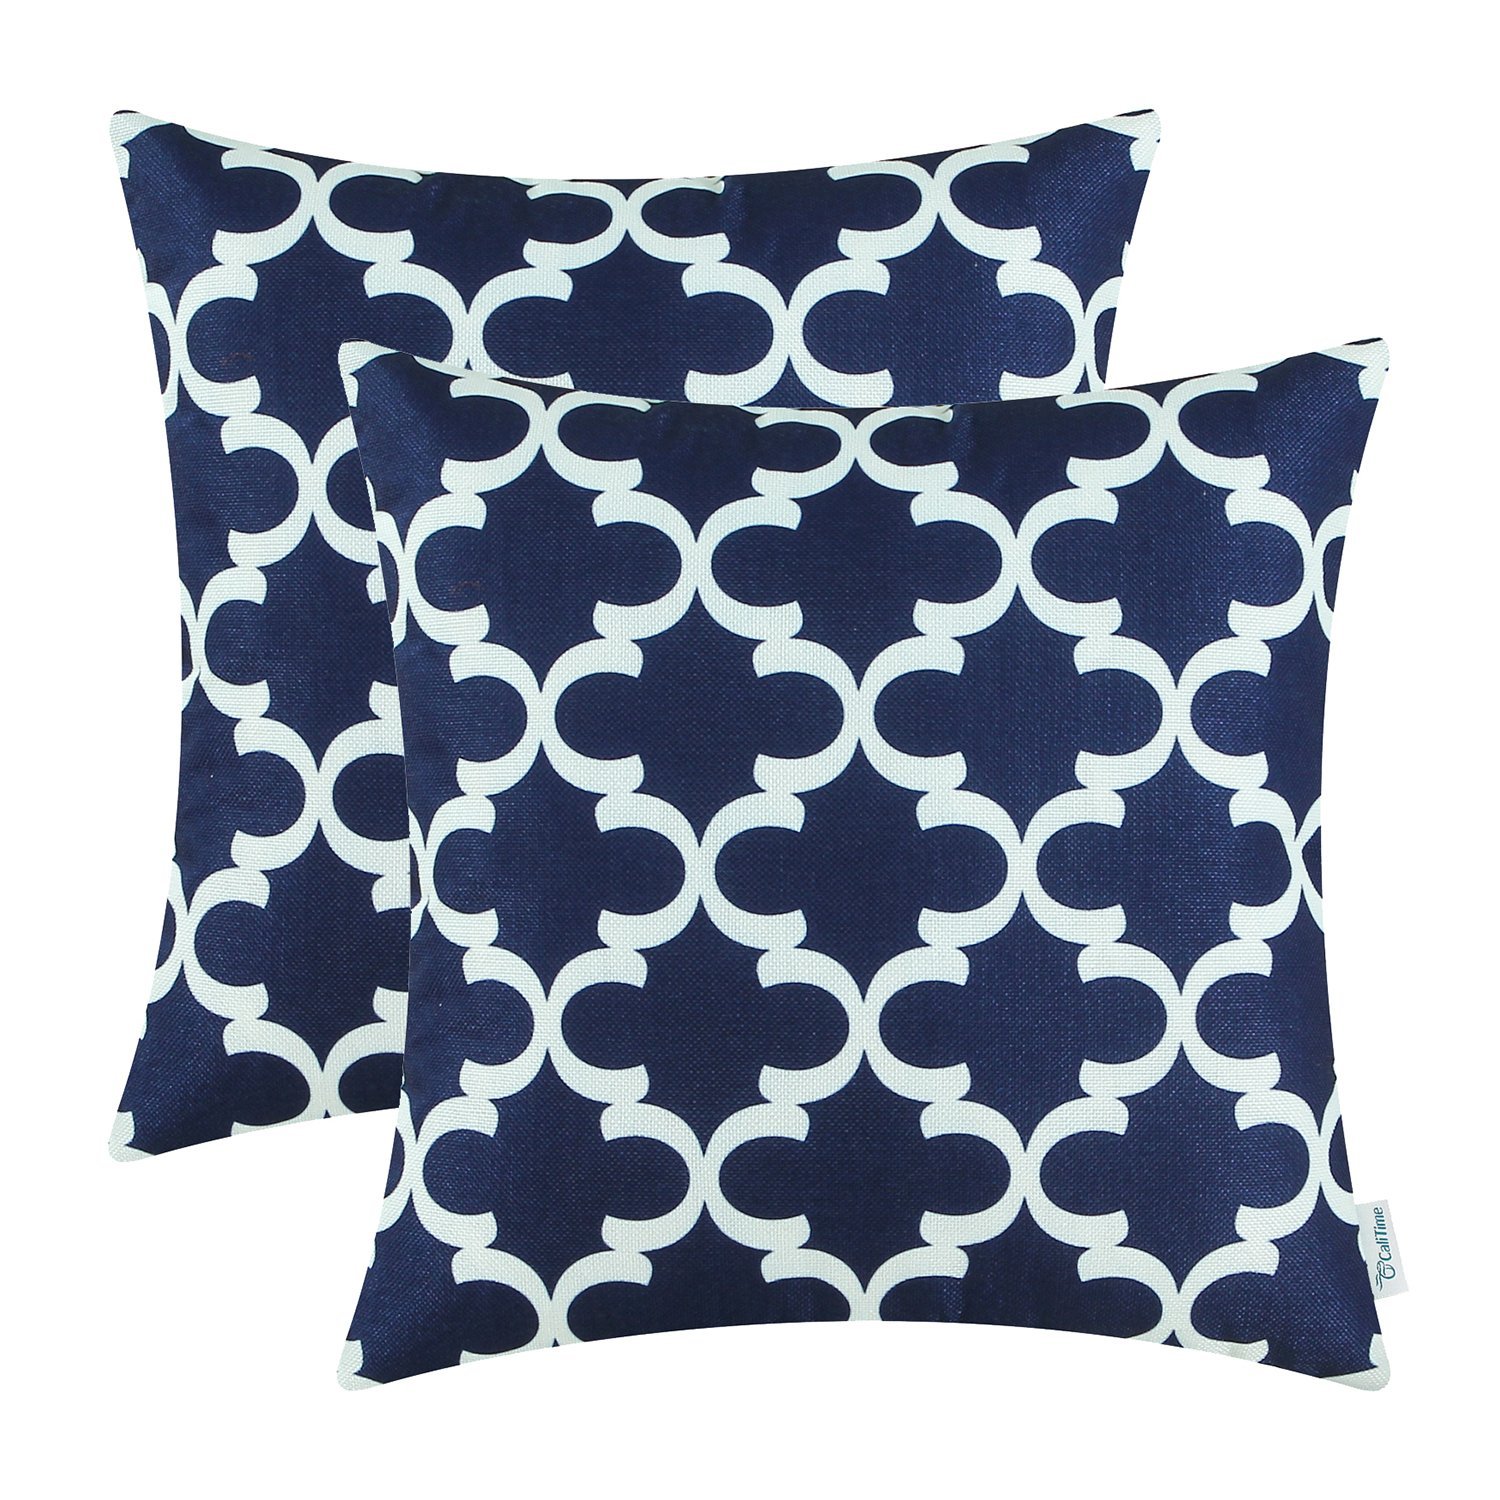 Pack of 2 CaliTime Throw Pillow Covers 18 X 18 Inches, Quatrefoil Accent Geometric, Navy Blue